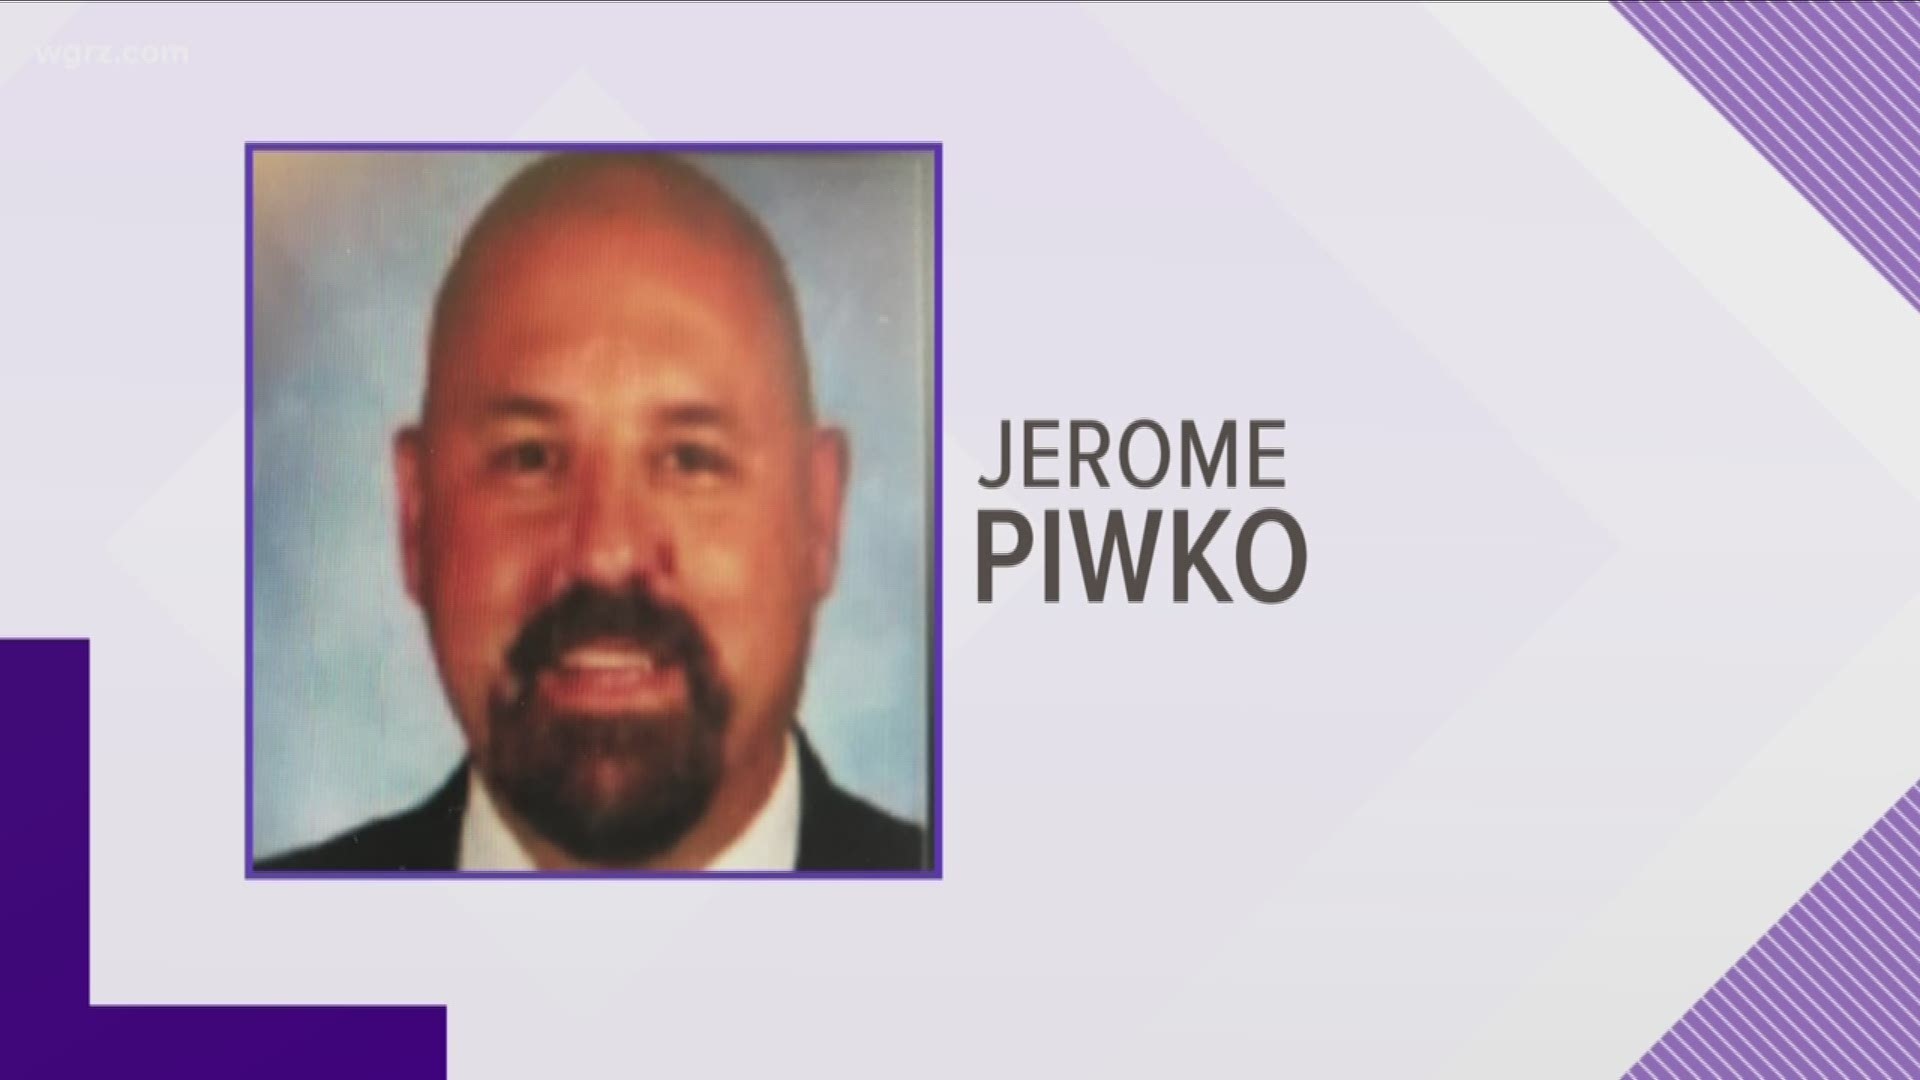 Jerome pee-ko (Piwko) had been on leave... for how he handled common councilmember Ulysees Wingo bringing a gun to the school...